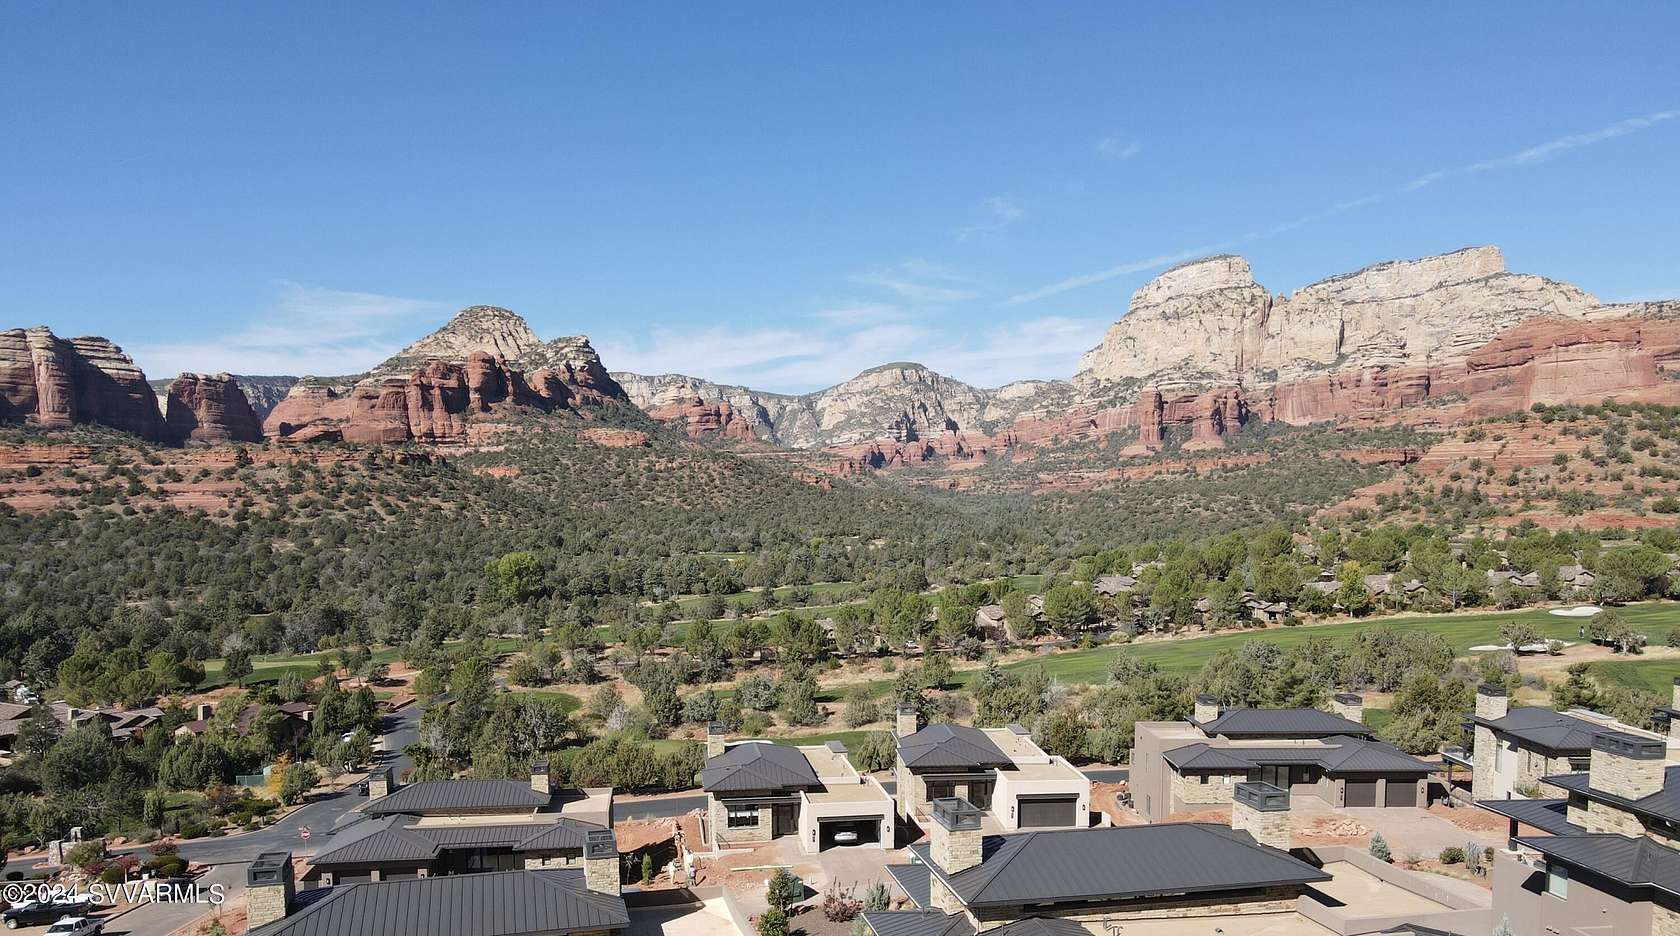 0.53 Acres of Residential Land for Sale in Sedona, Arizona